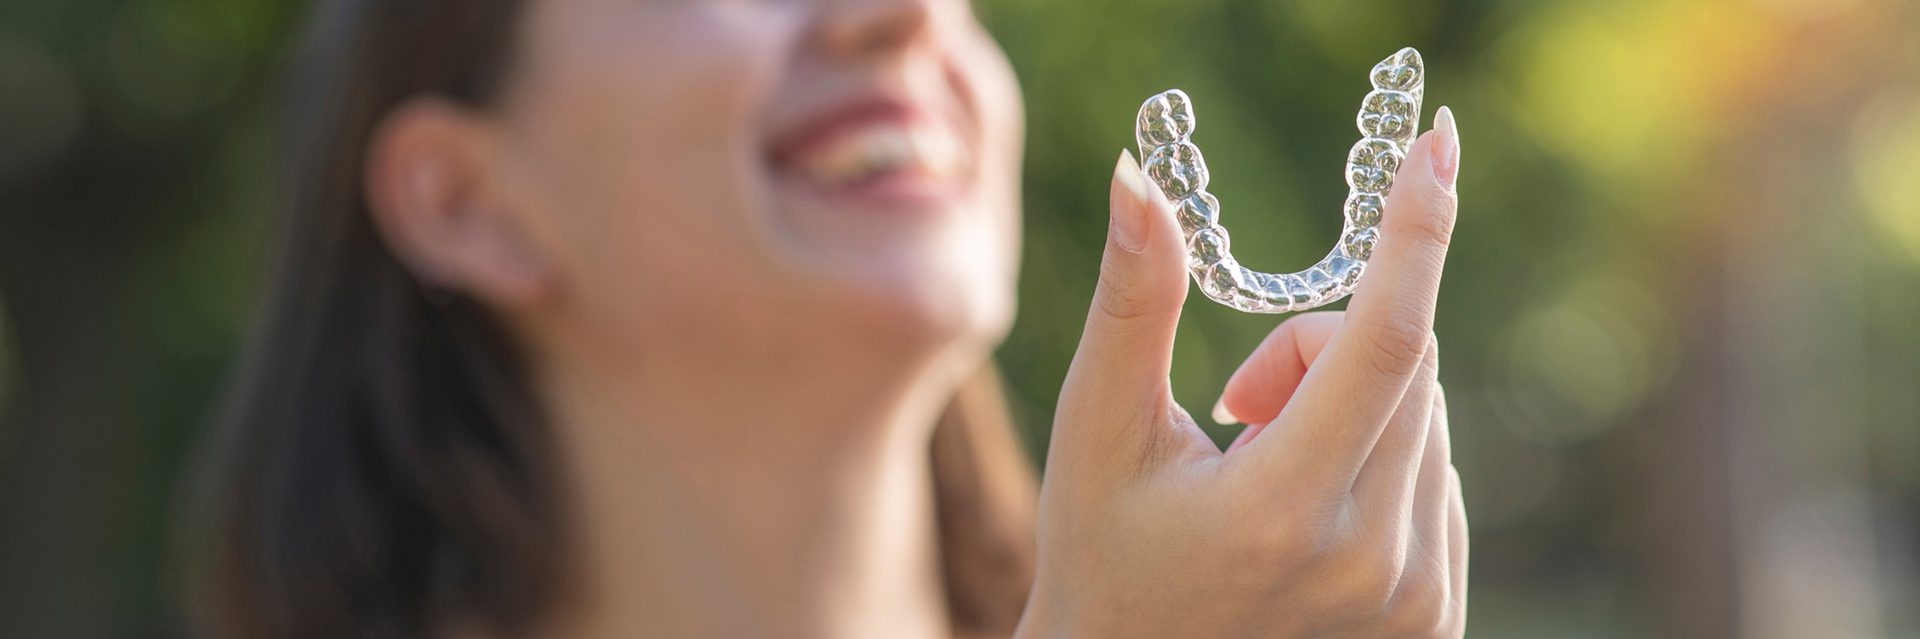 woman smiling holding clear aligner